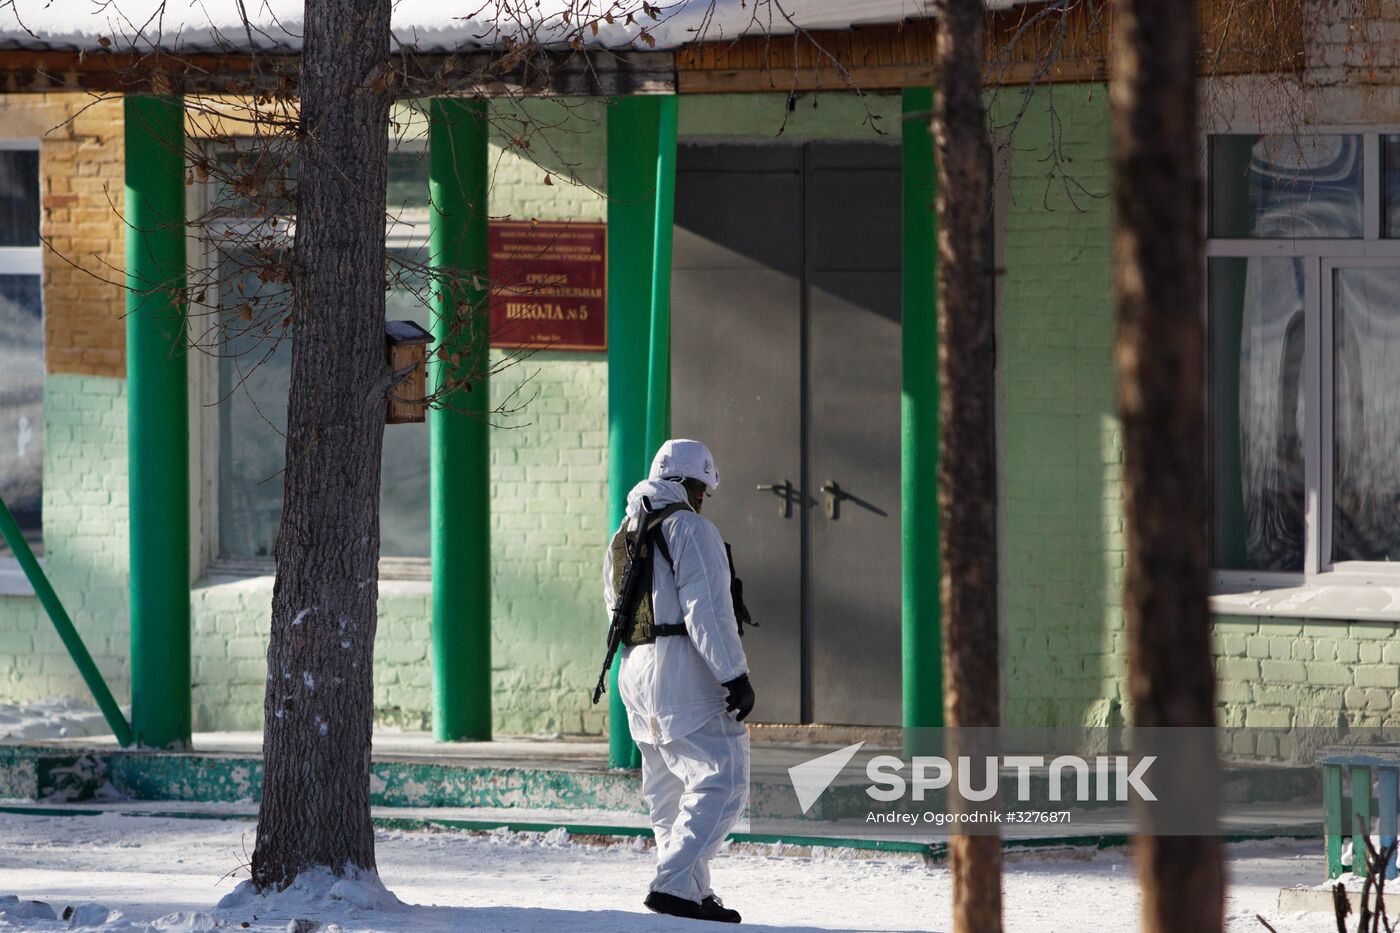 Attack on school in Ulan-Ude